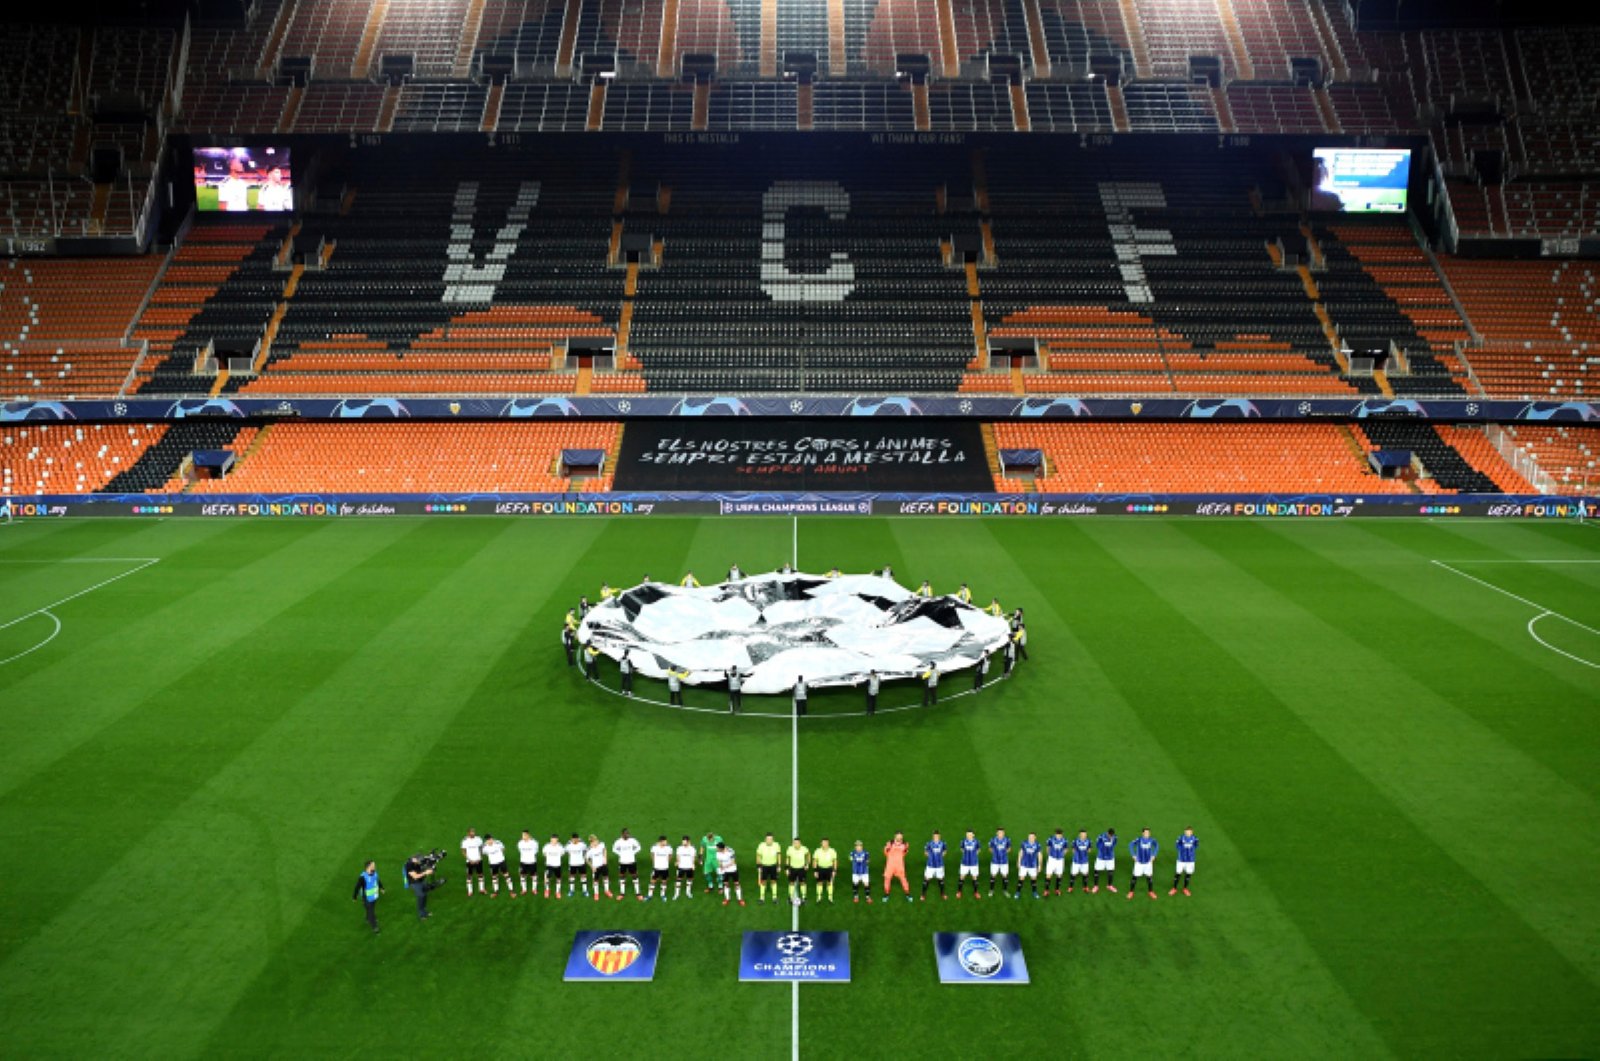 Atalanta and Valencia players line up ahead of the Champions League round of 16 second leg soccer match between Valencia and Atalanta in Valencia, Spain, Tuesday March 10, 2020. The match was played in an empty stadium because of the coronavirus outbreak. (UEFA via AP)